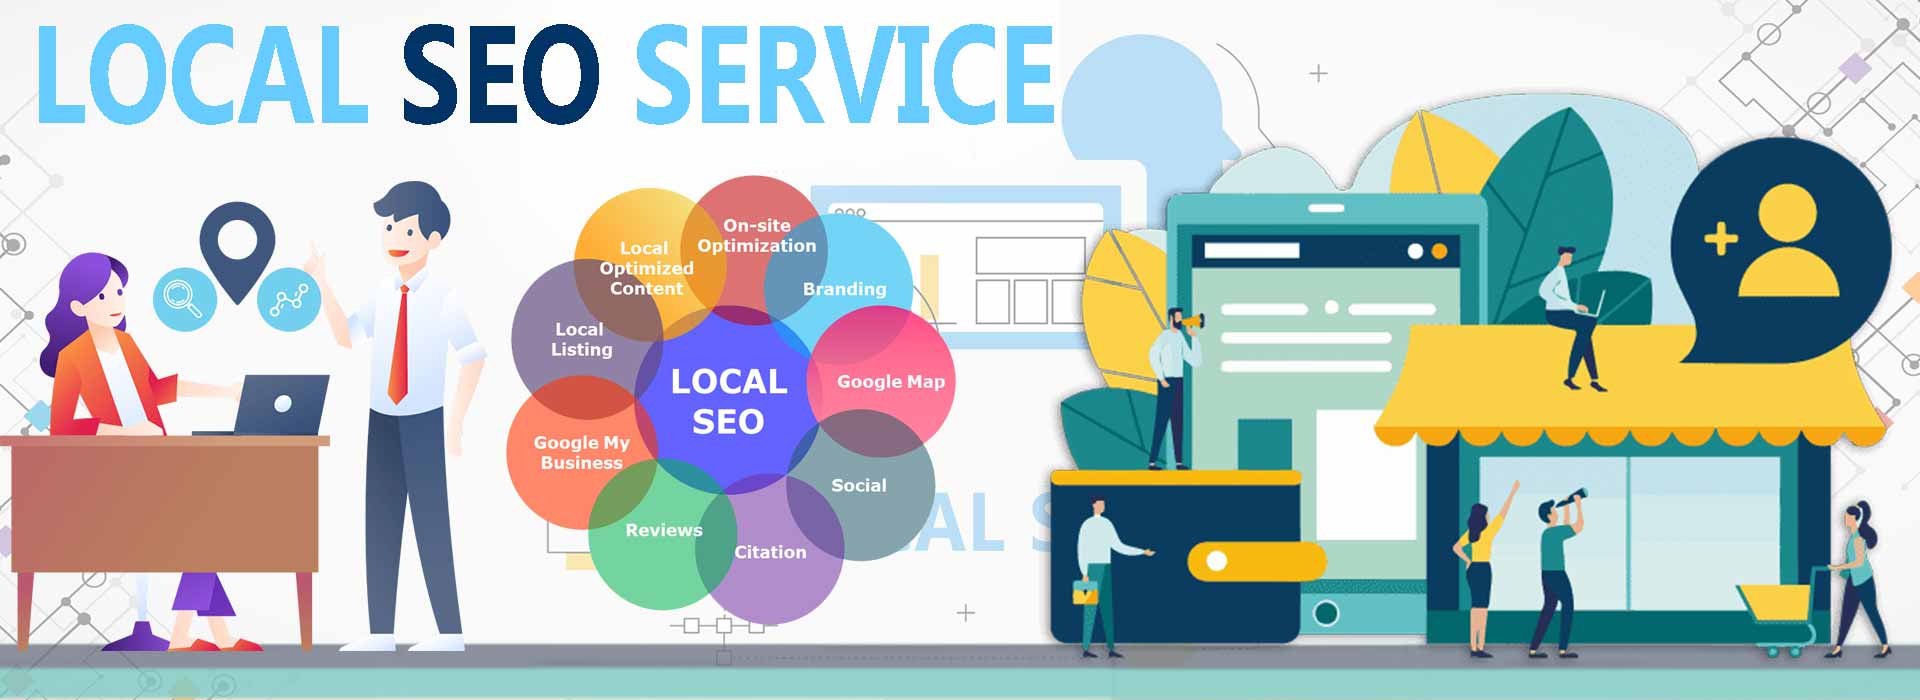 Local SEO Searvices for Small business